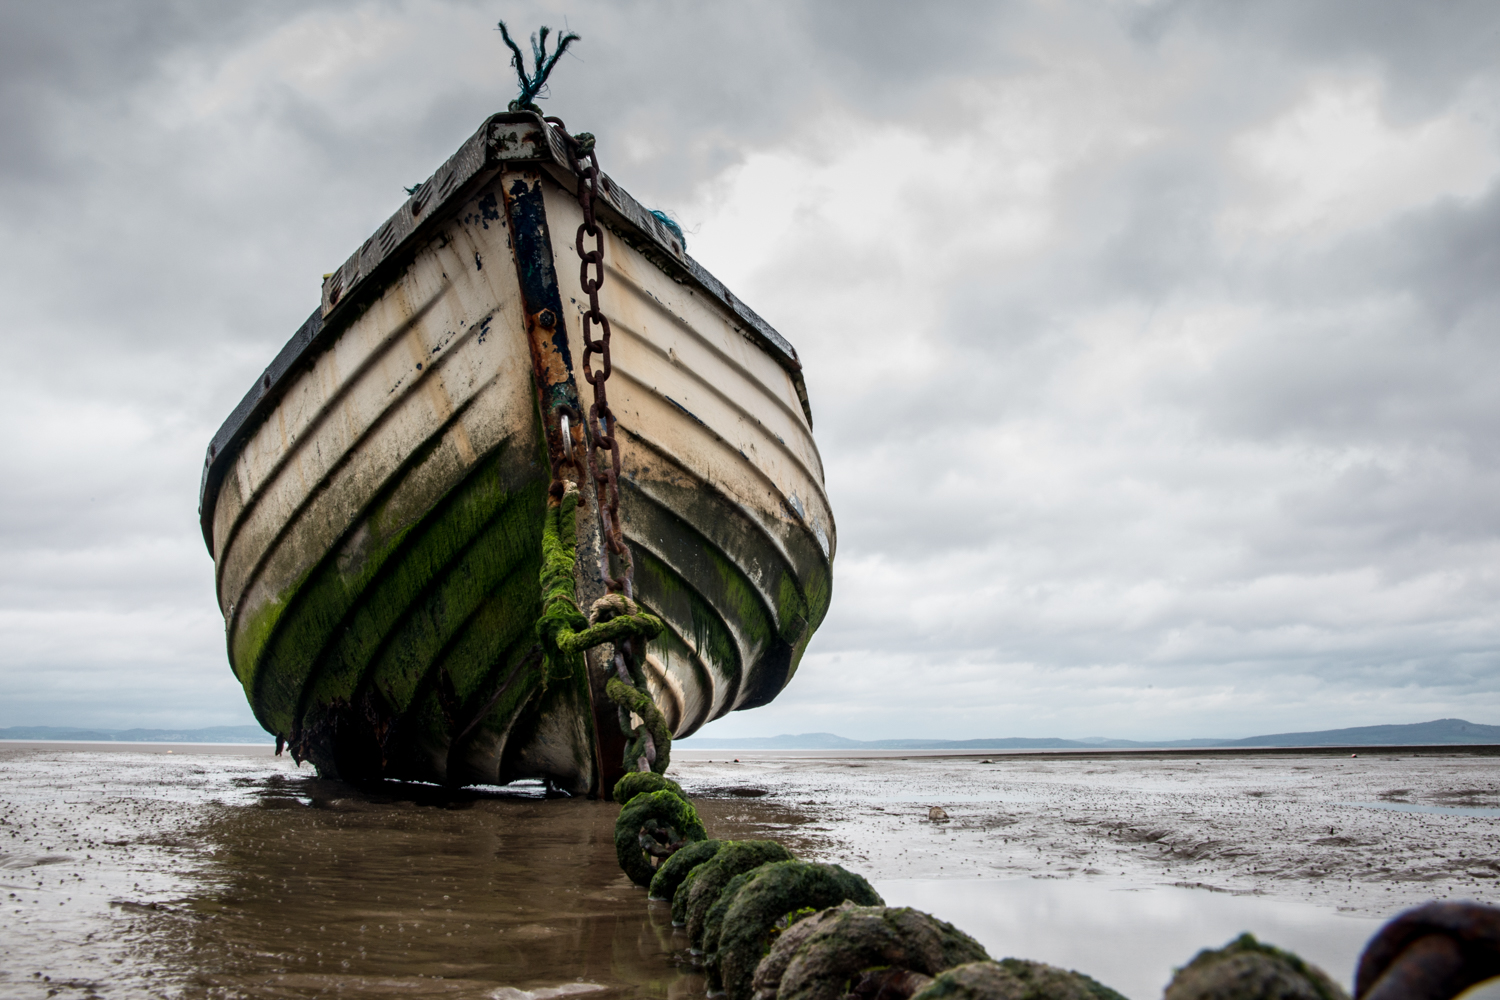 A Hull full of Stories